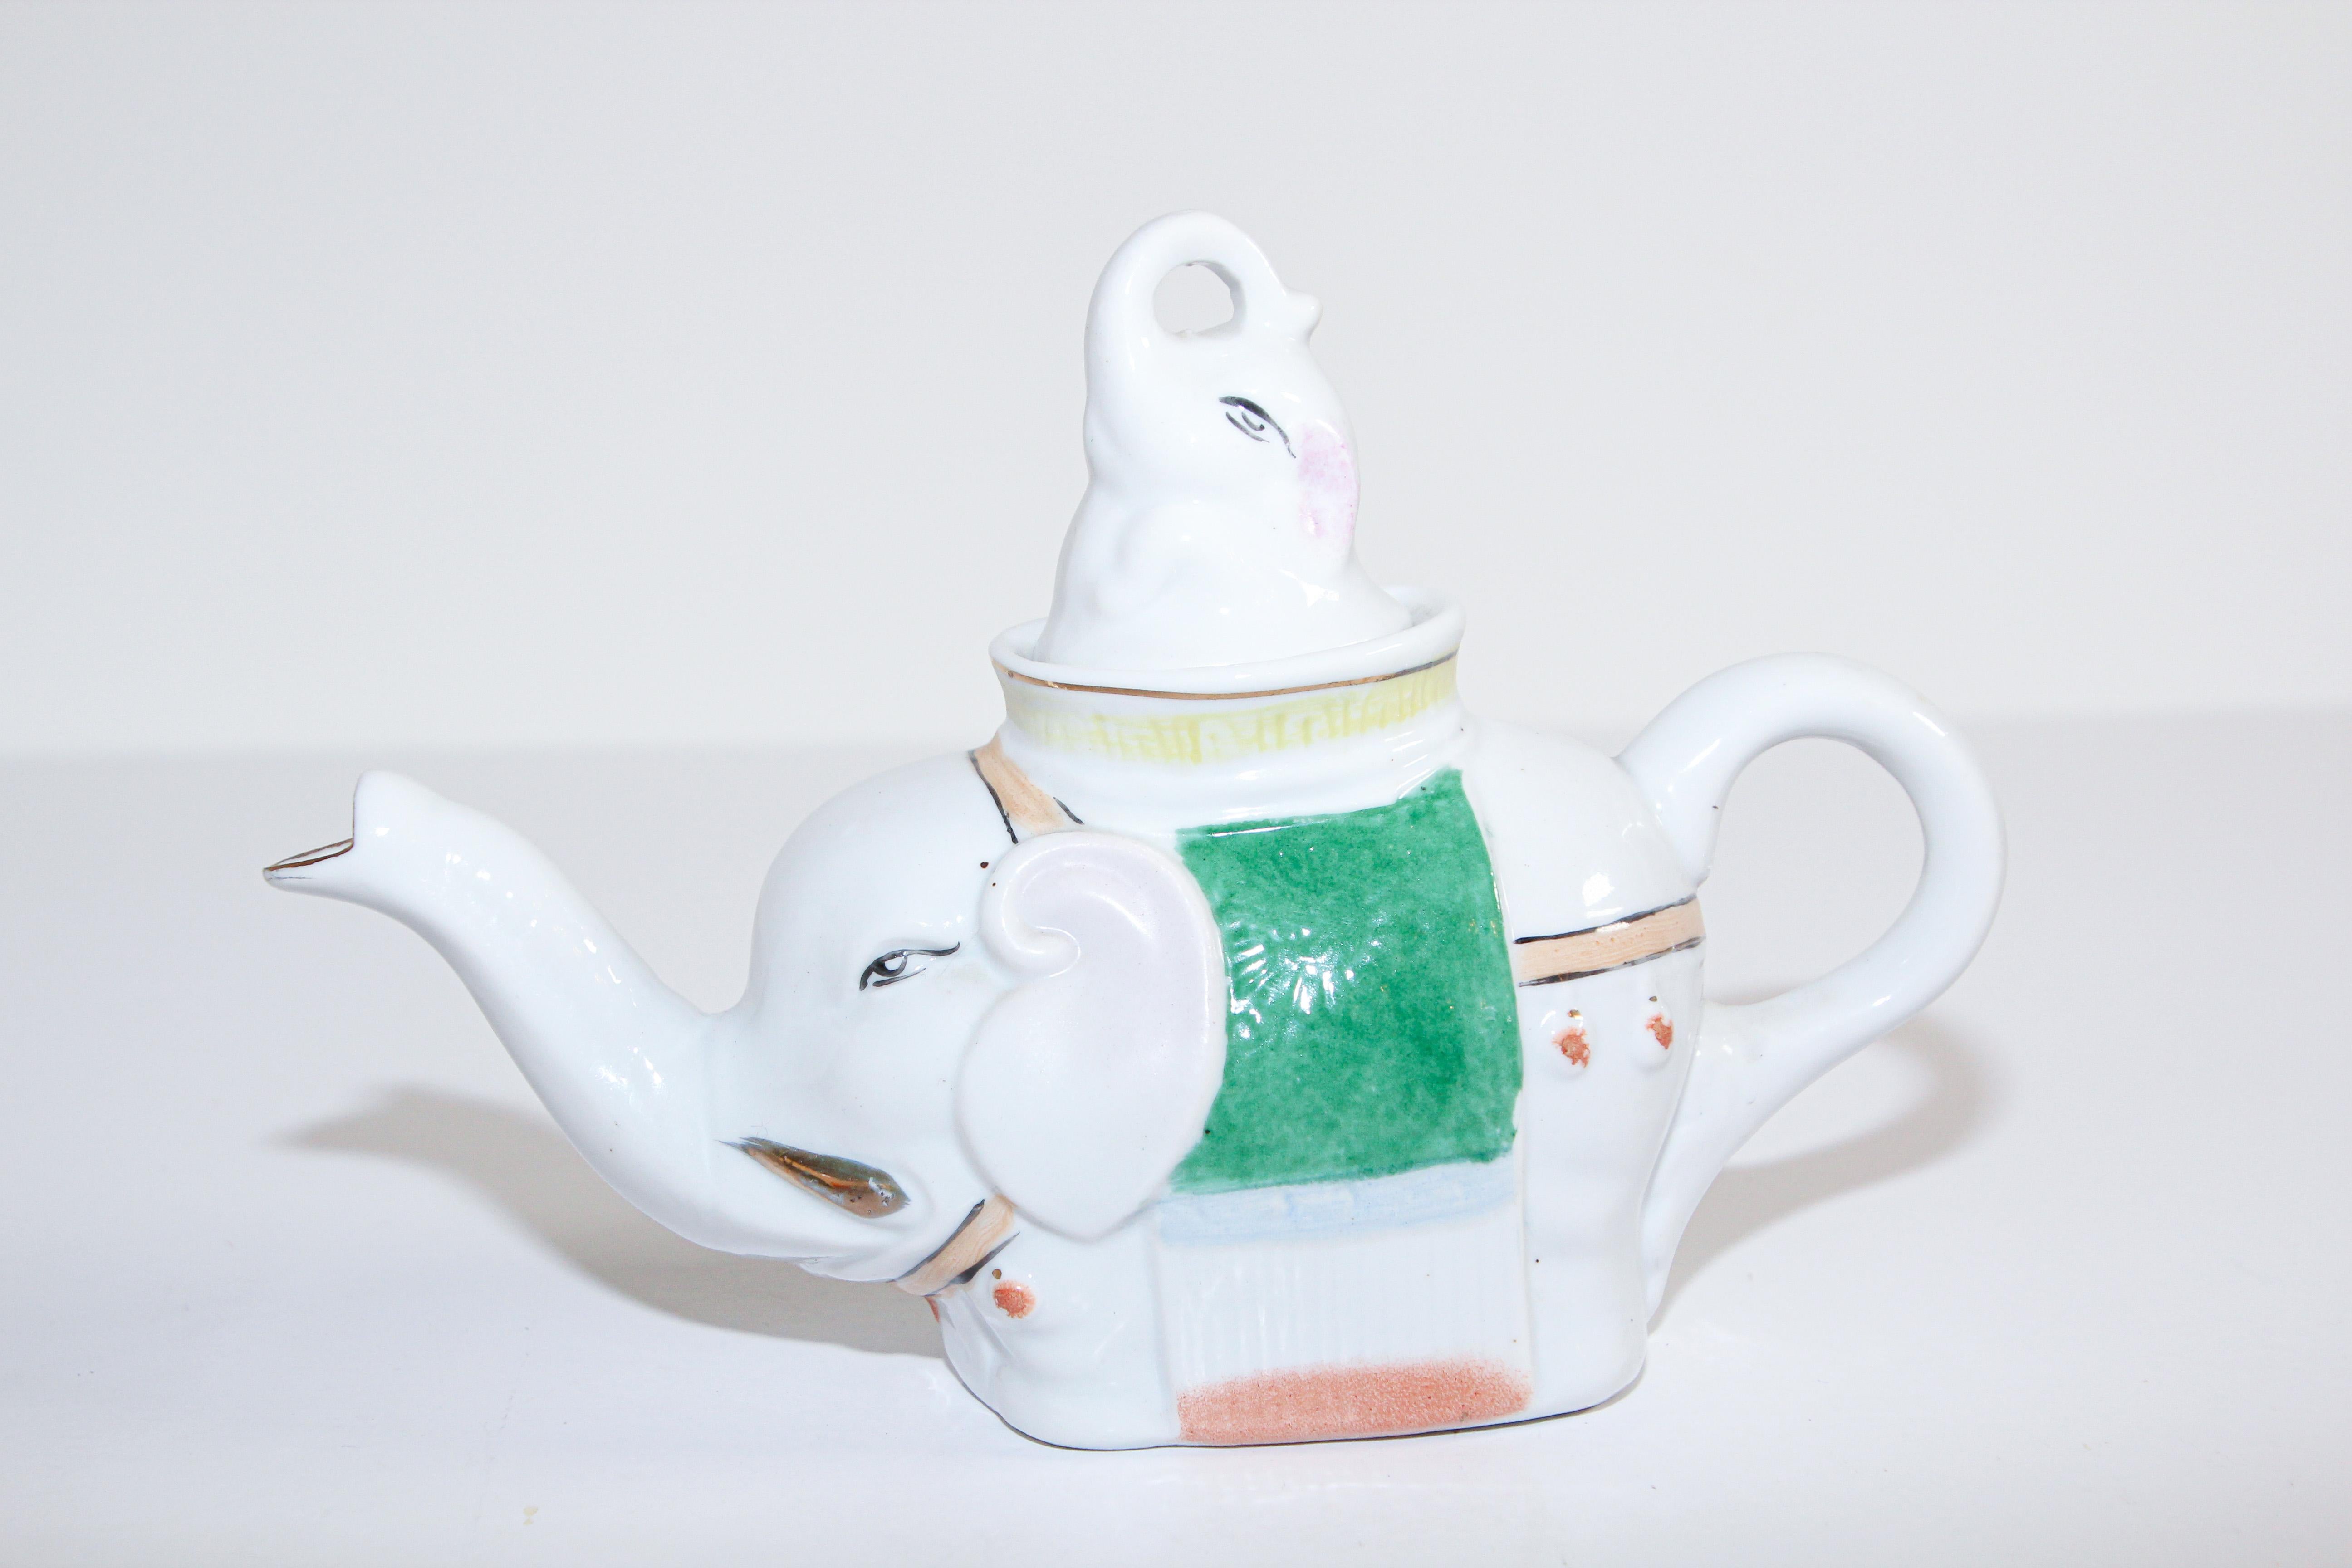 Porcelain teapot in the form of an elephant carrying a baby elephant.
Vintage elephant tea pot made in Japan, beautiful coloring flower work is done on porcelain,
This wonderful oriental ceramic tea pot is modeled as a standing elephant carrying a